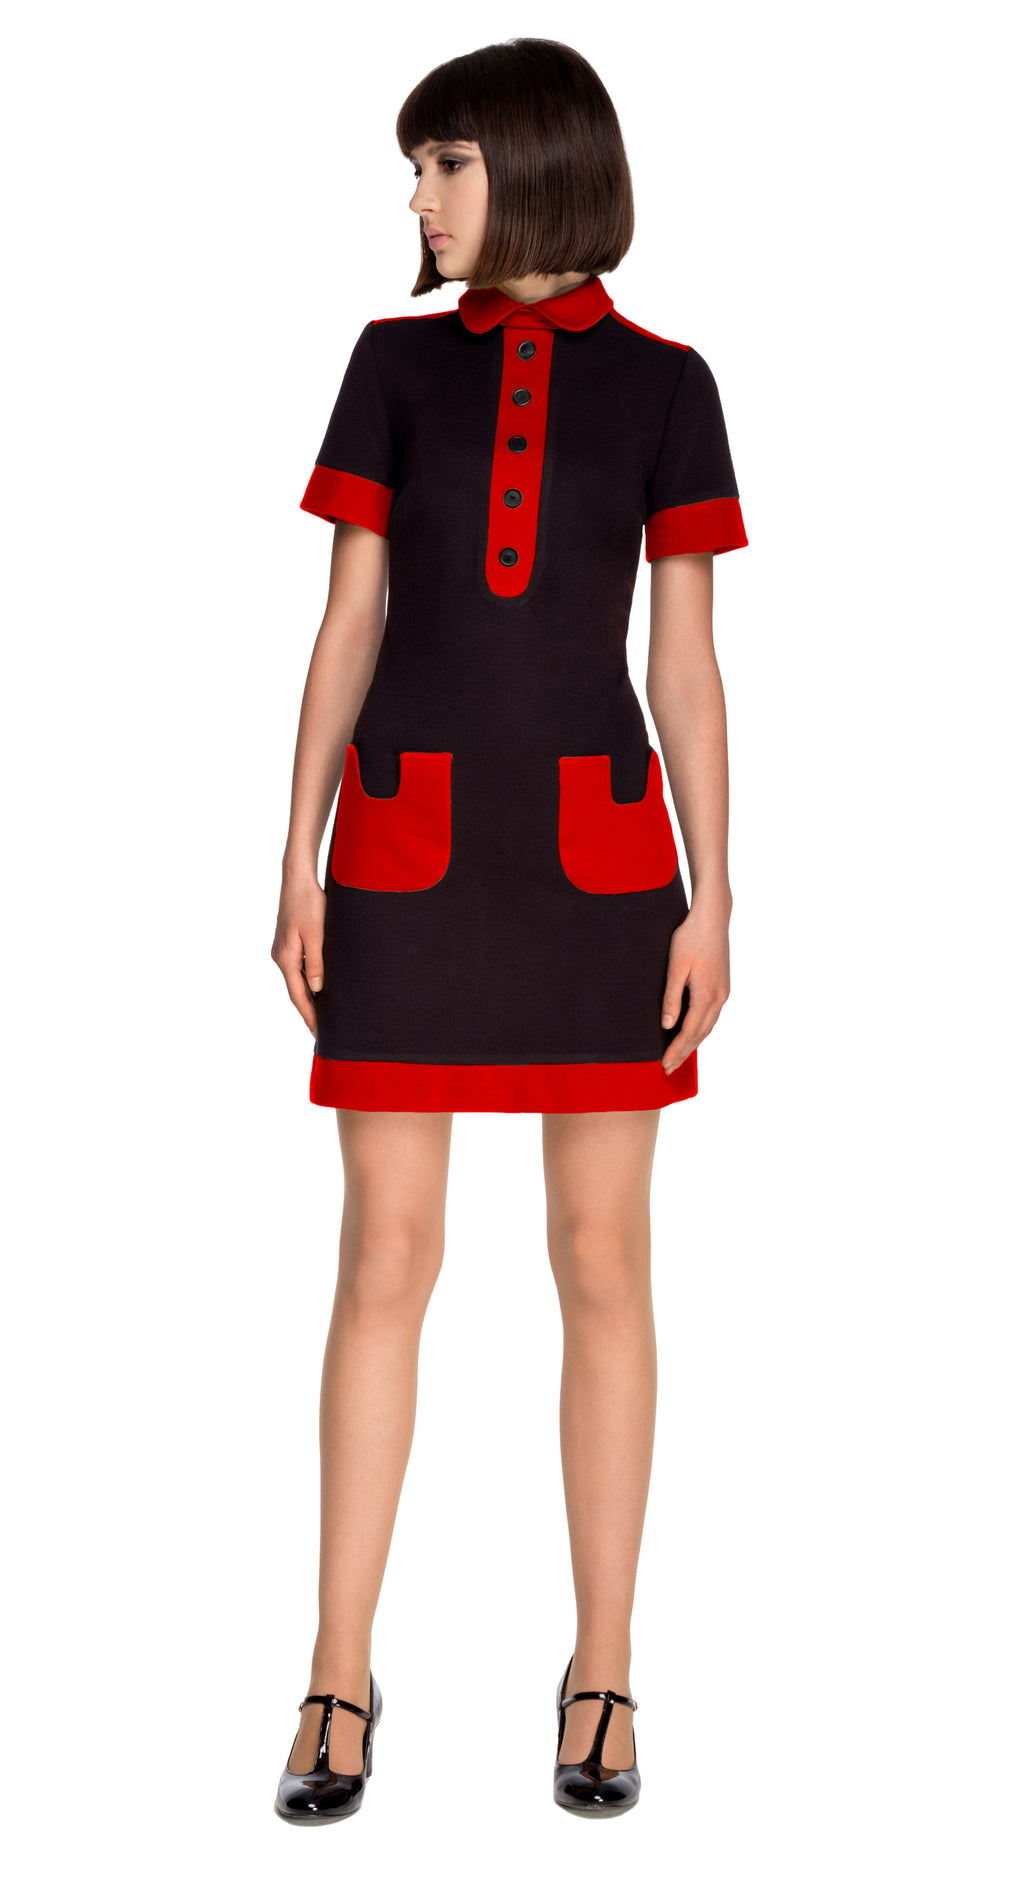 red and black jersey dress